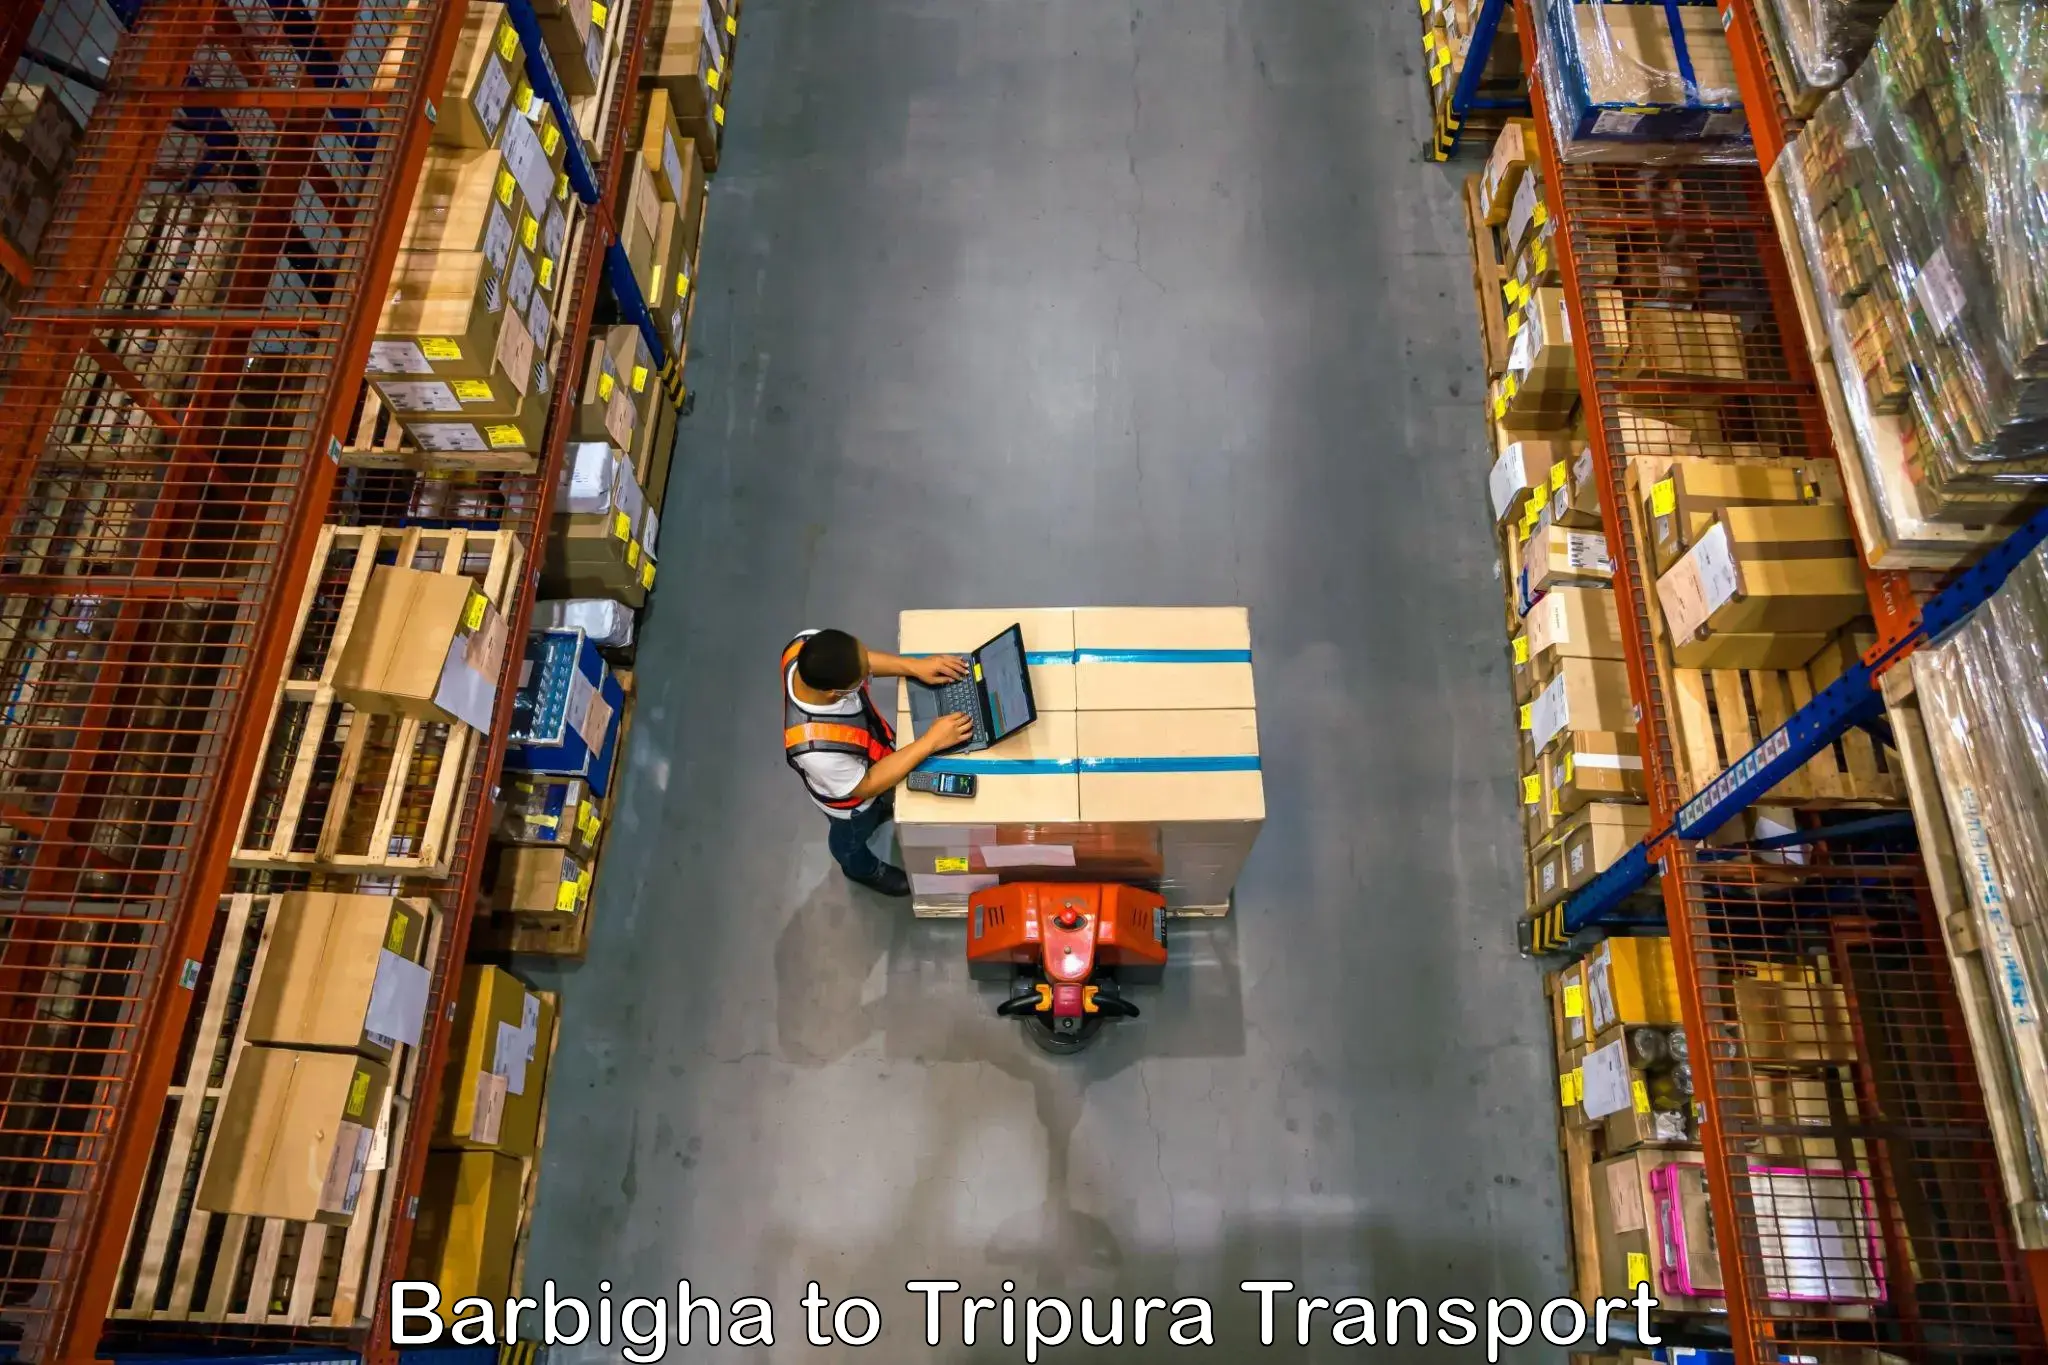 Air freight transport services in Barbigha to Udaipur Tripura